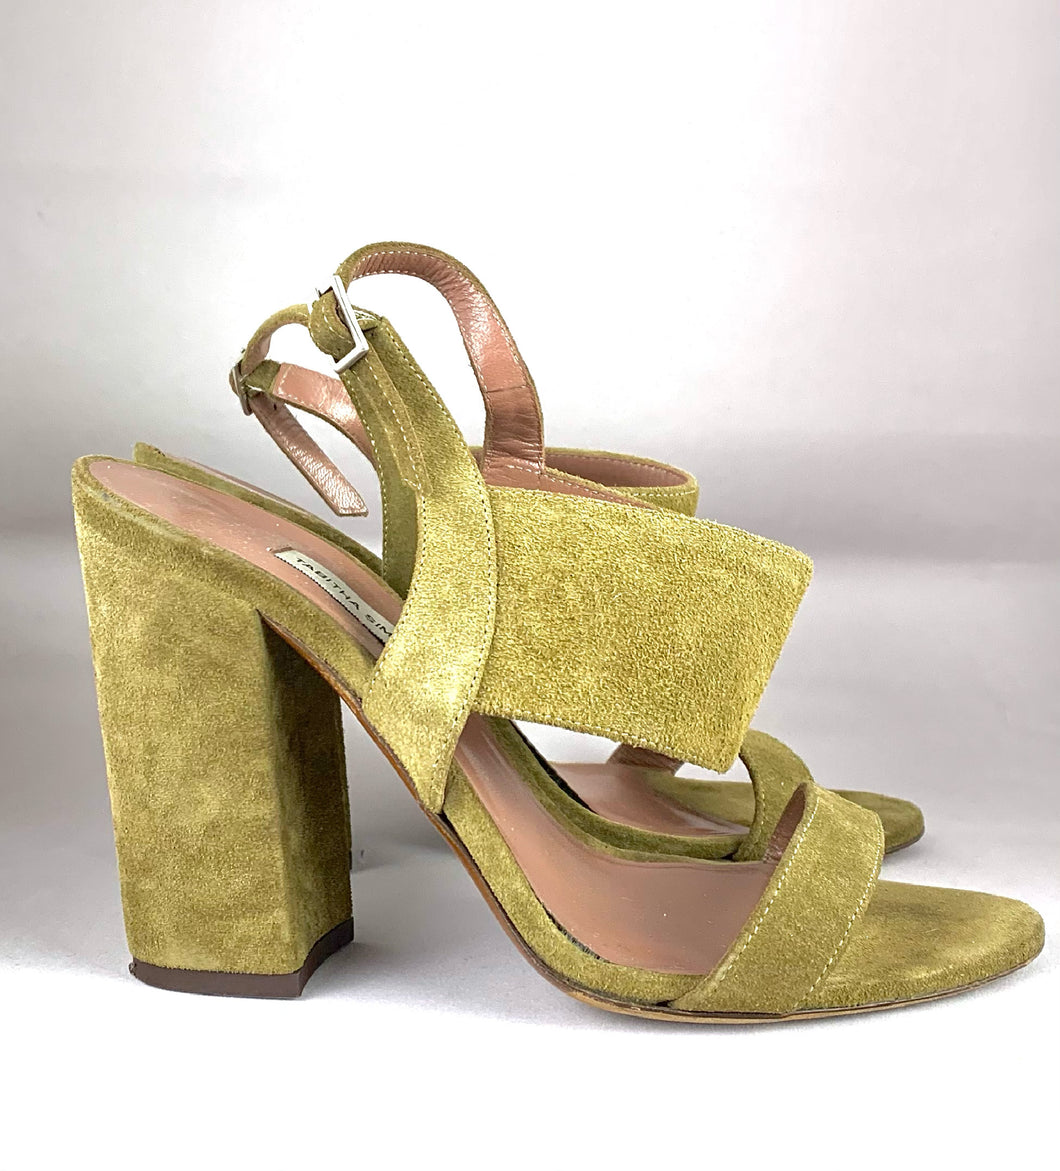 Tabitha Simmons Suede Sandals size 8